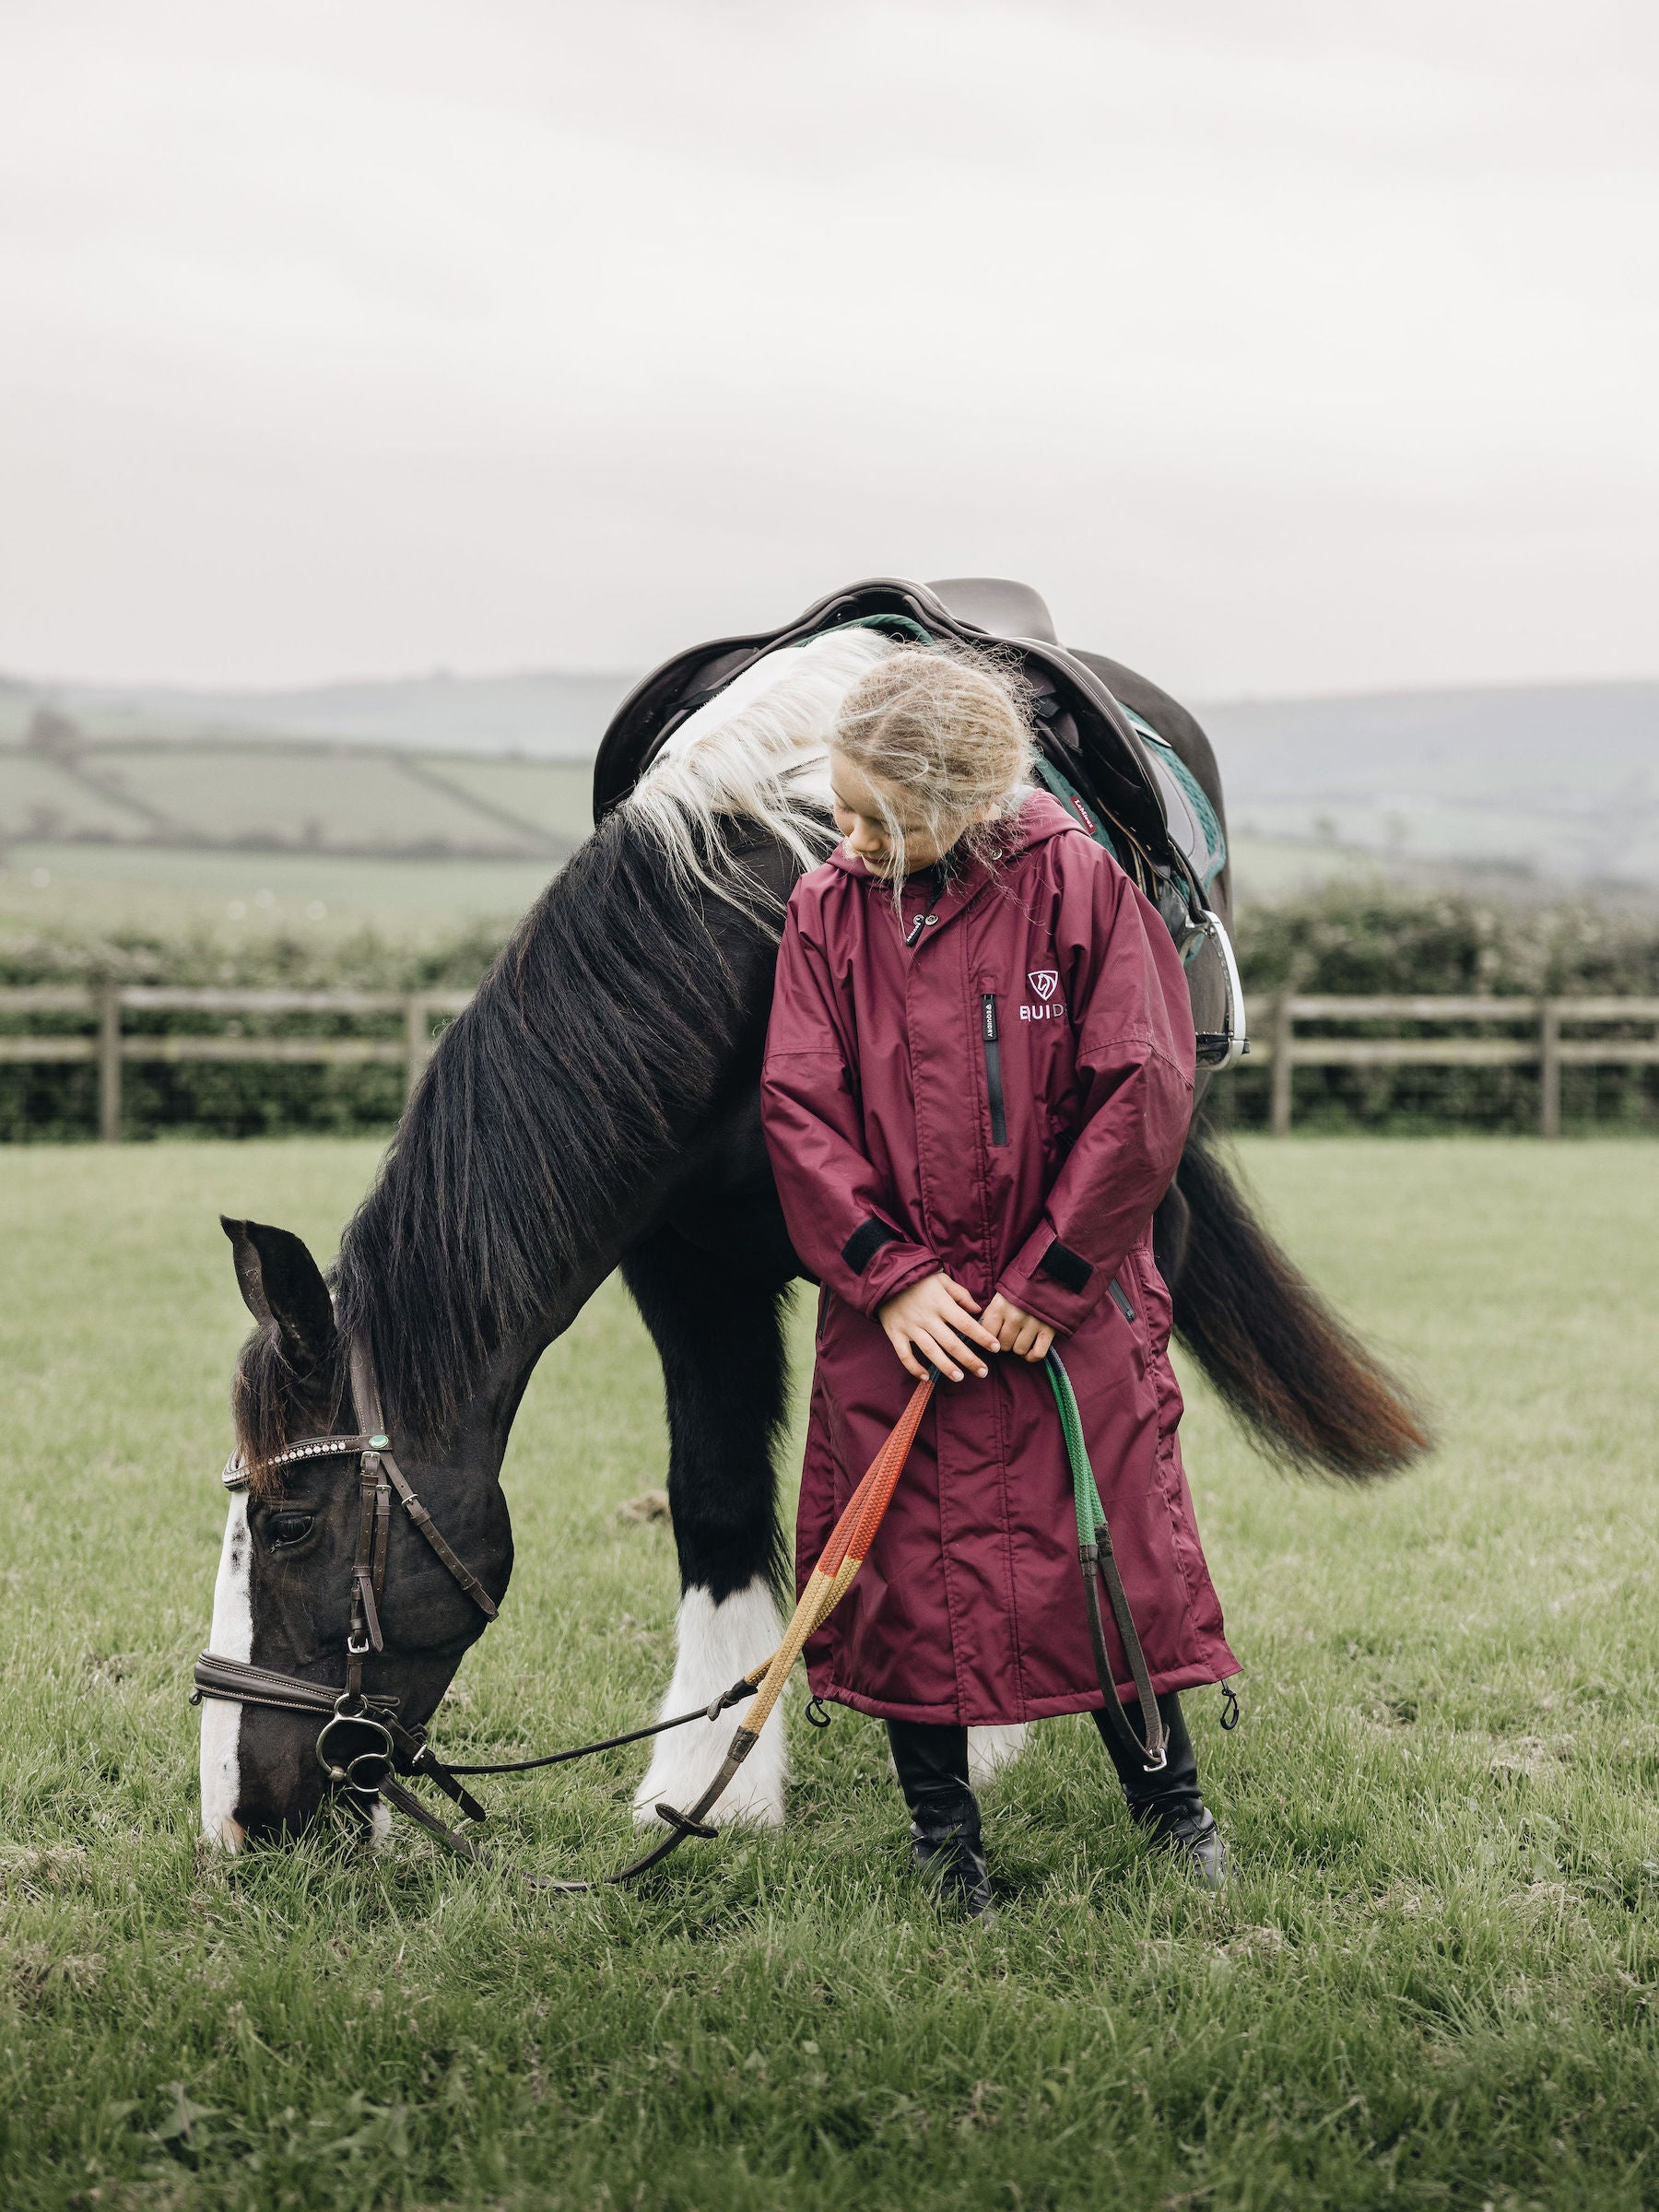  plum, EQUIDRY Equestrian oversized waterproof Horse Riding Coat  with side zips featured on Child with Pony  